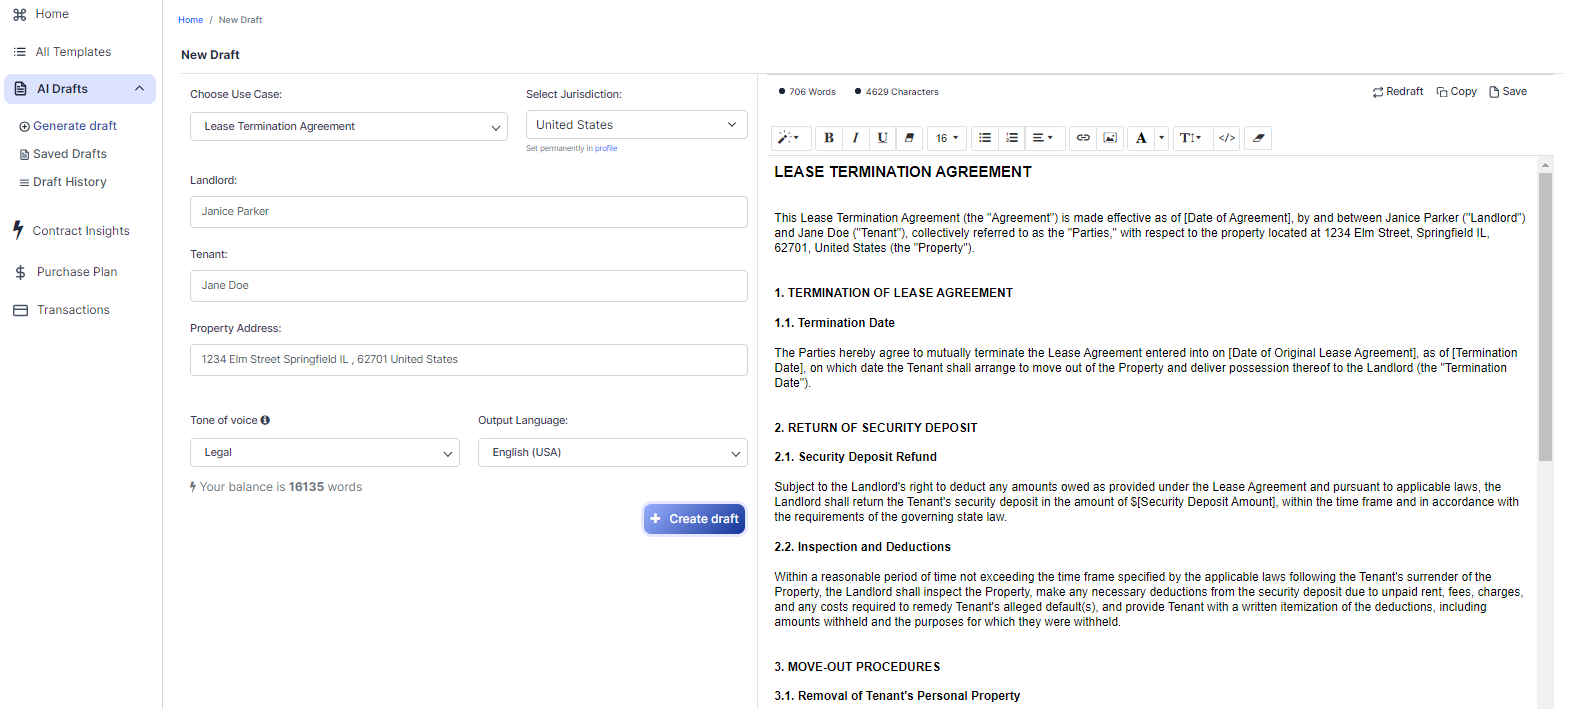 Lease Termination Agreement template